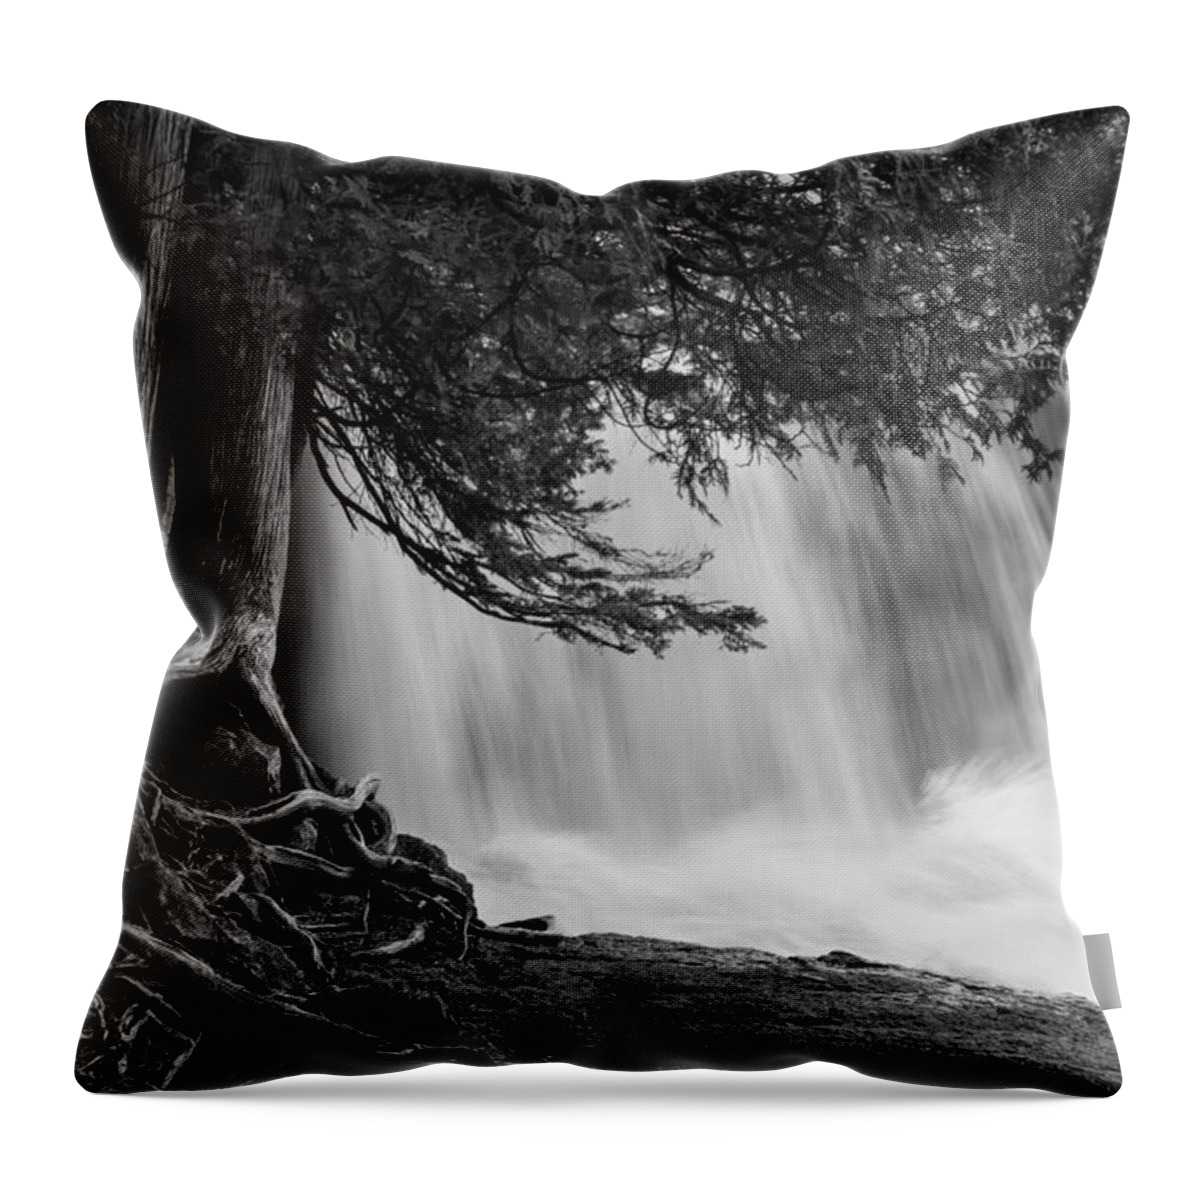 rooted In Spring cedar Trees Roots spring Melt gooseberry Falls Waterfall black And White lake Superior Power gooseberry Falls State Park minnesota Nature greeting Cards mary Amerman Throw Pillow featuring the photograph Rooted In Spring #2 by Mary Amerman